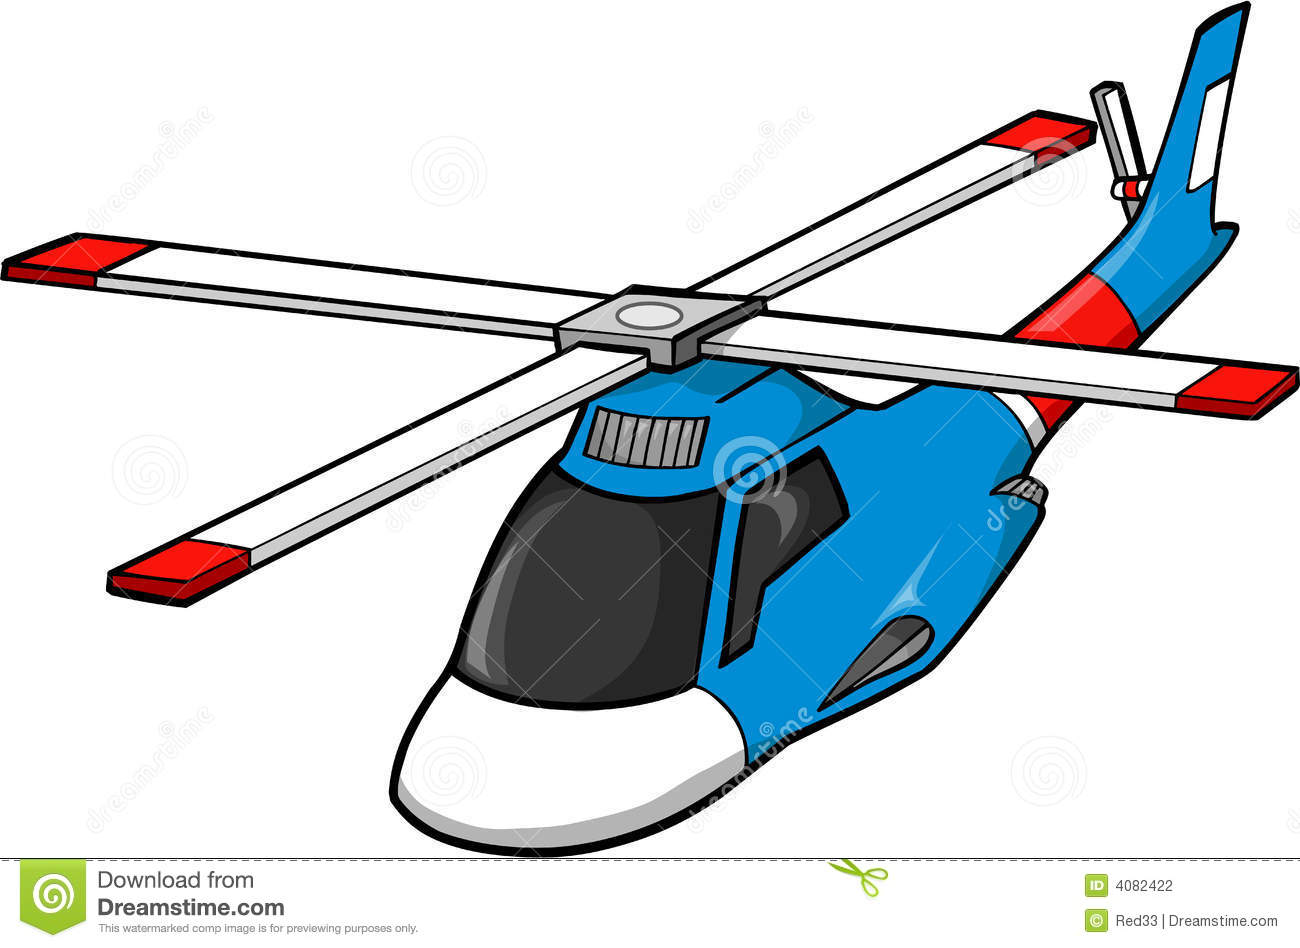 Clipart Info - Helicopter Clipart